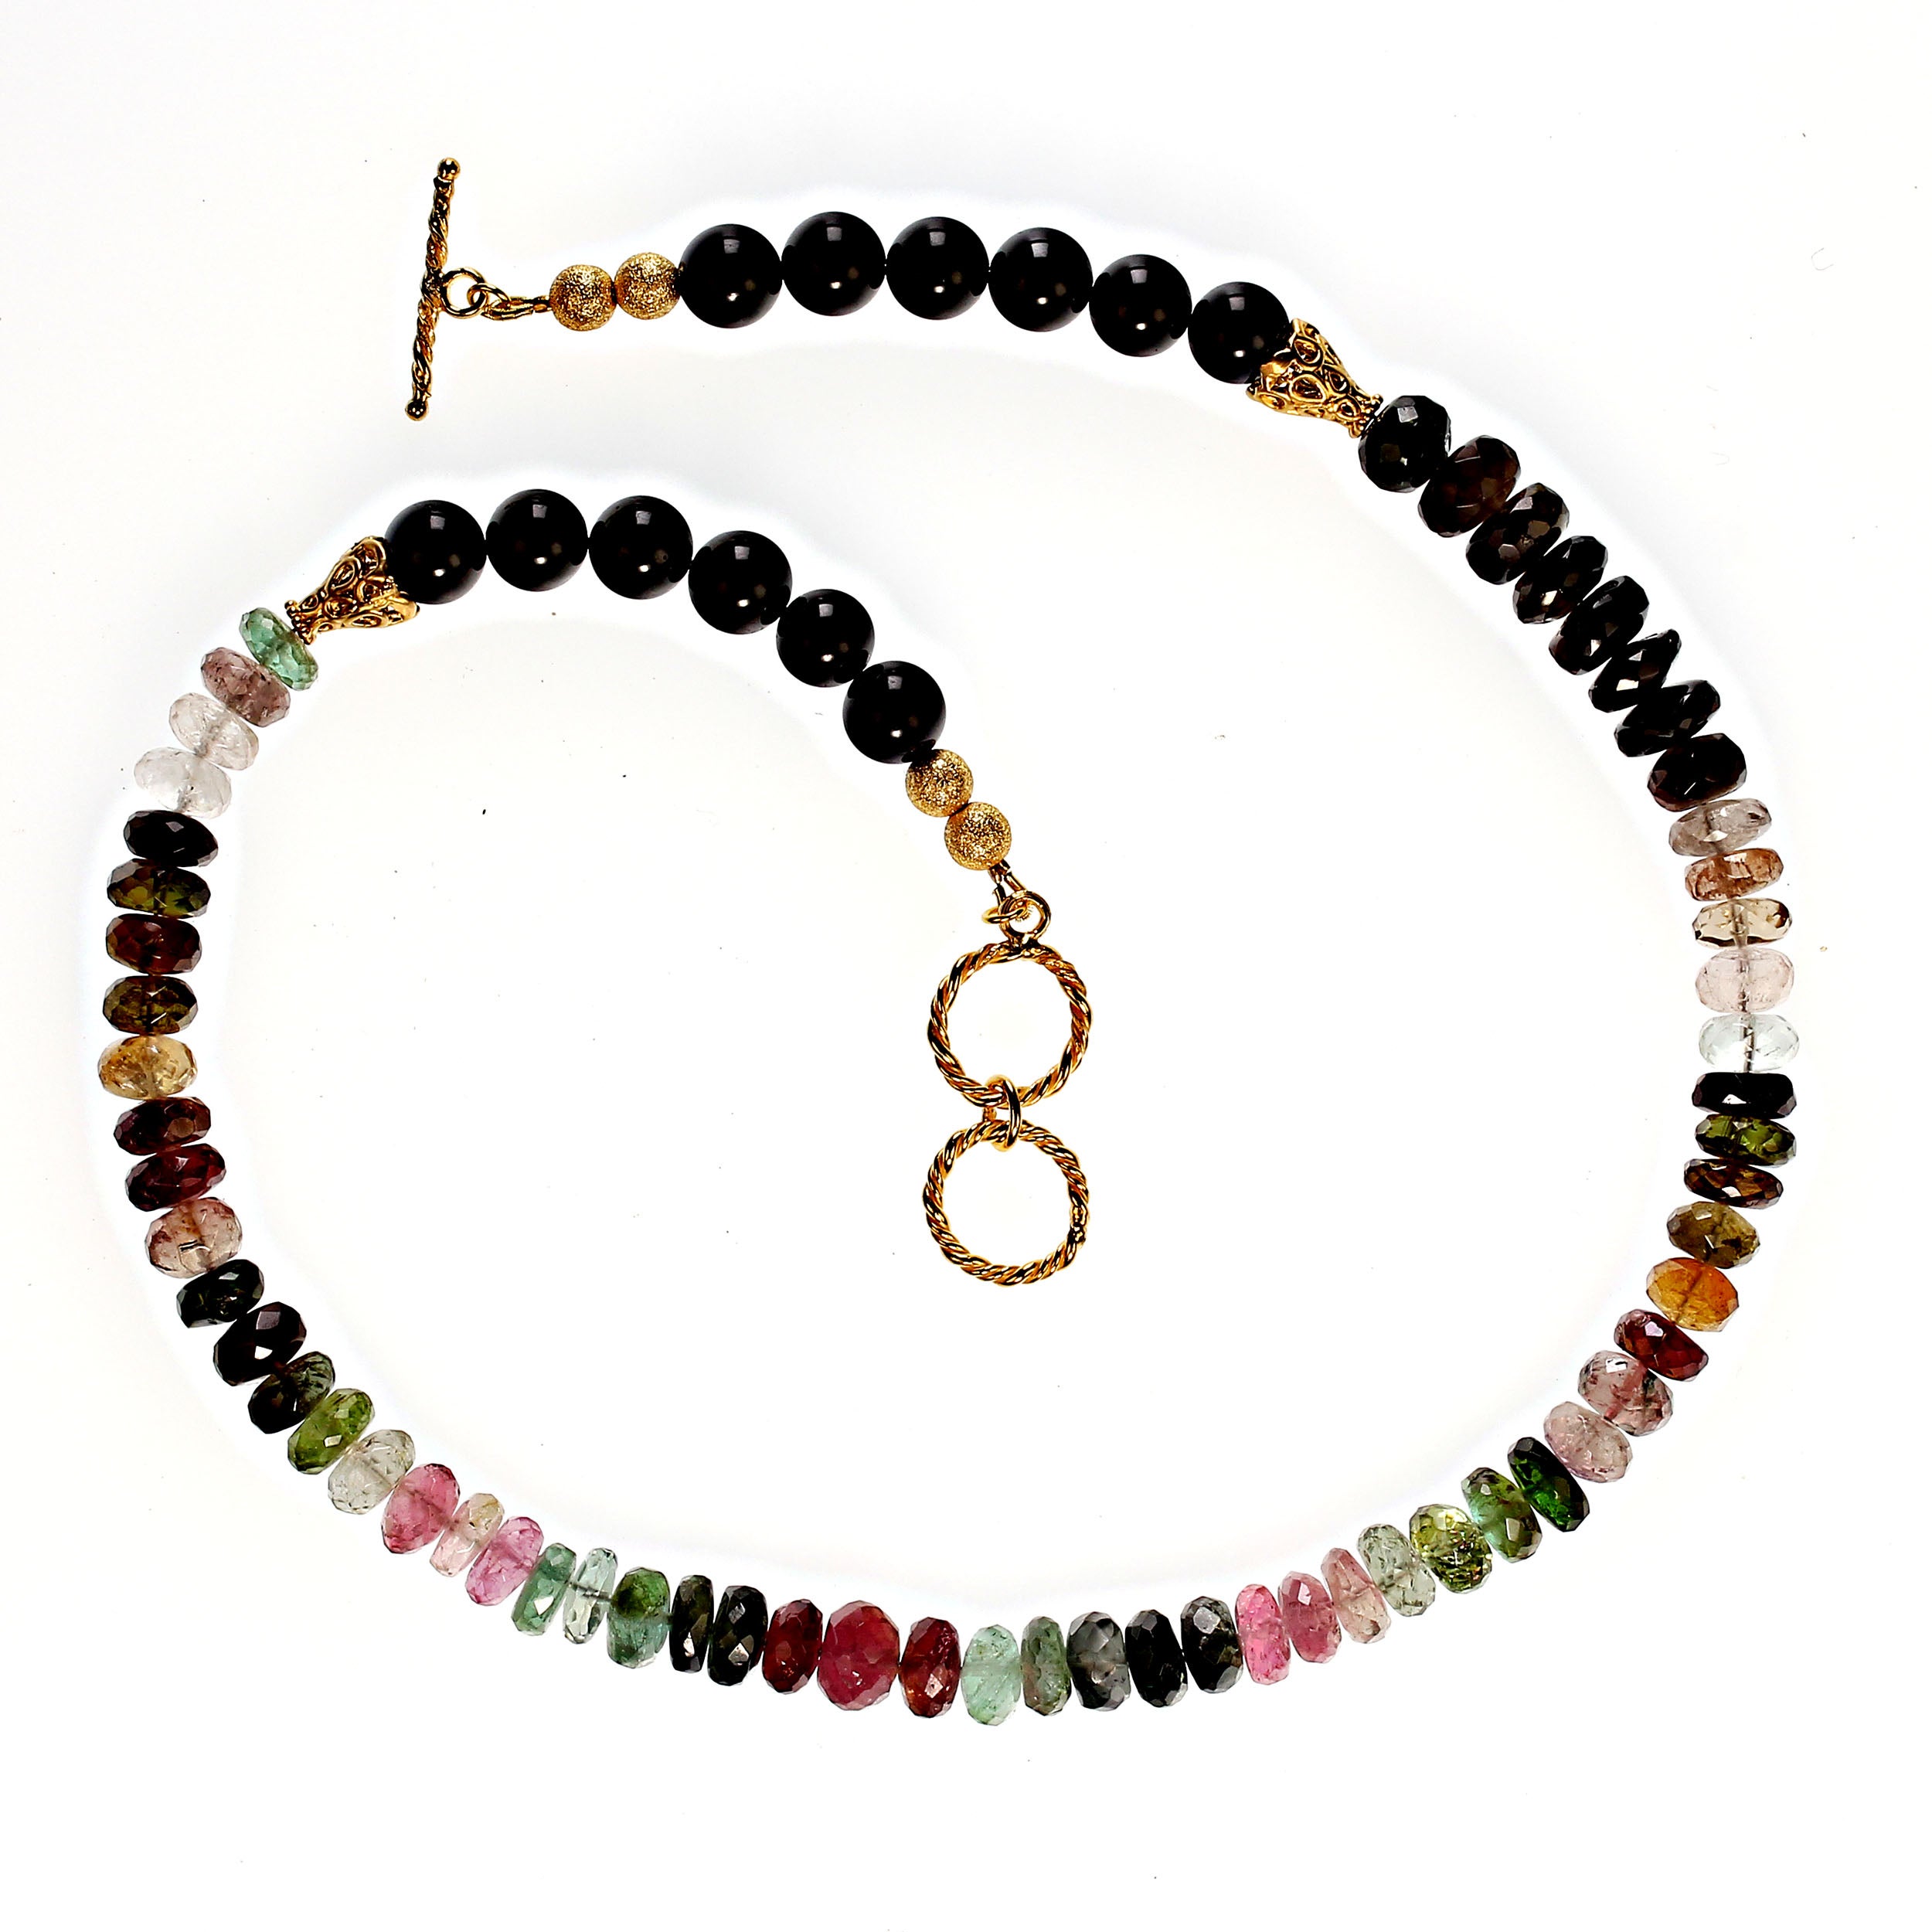 18 Inch multi color tourmaline necklace gold plated two ring toggle clasp.  This unique necklace features sparkling 8mm faceted multi color tourmalines and smooth black 8mm tourmalines to extend the back. Perfect for your winter wardrobe.  MN2375